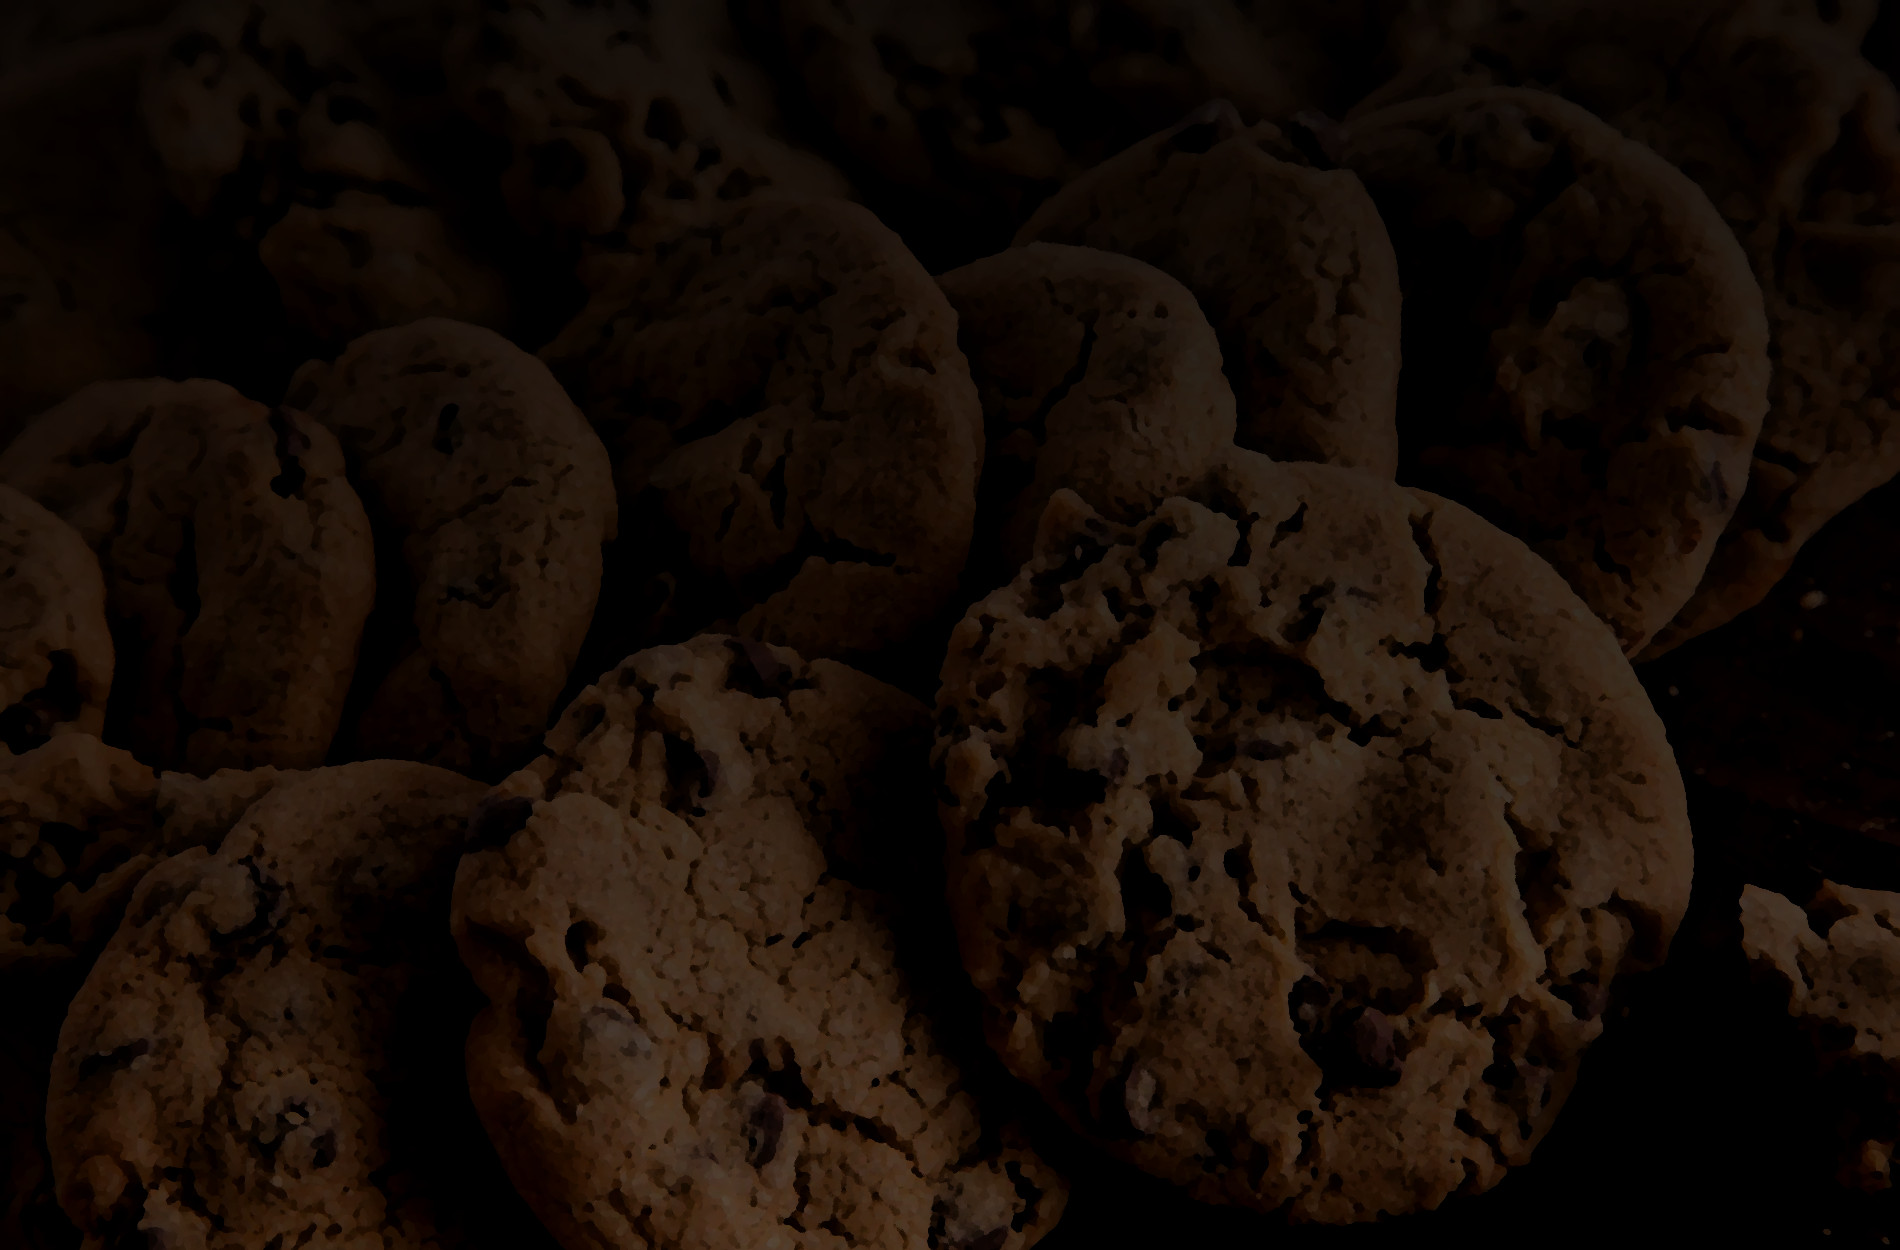 www.i-dont-care-about-cookies.eu